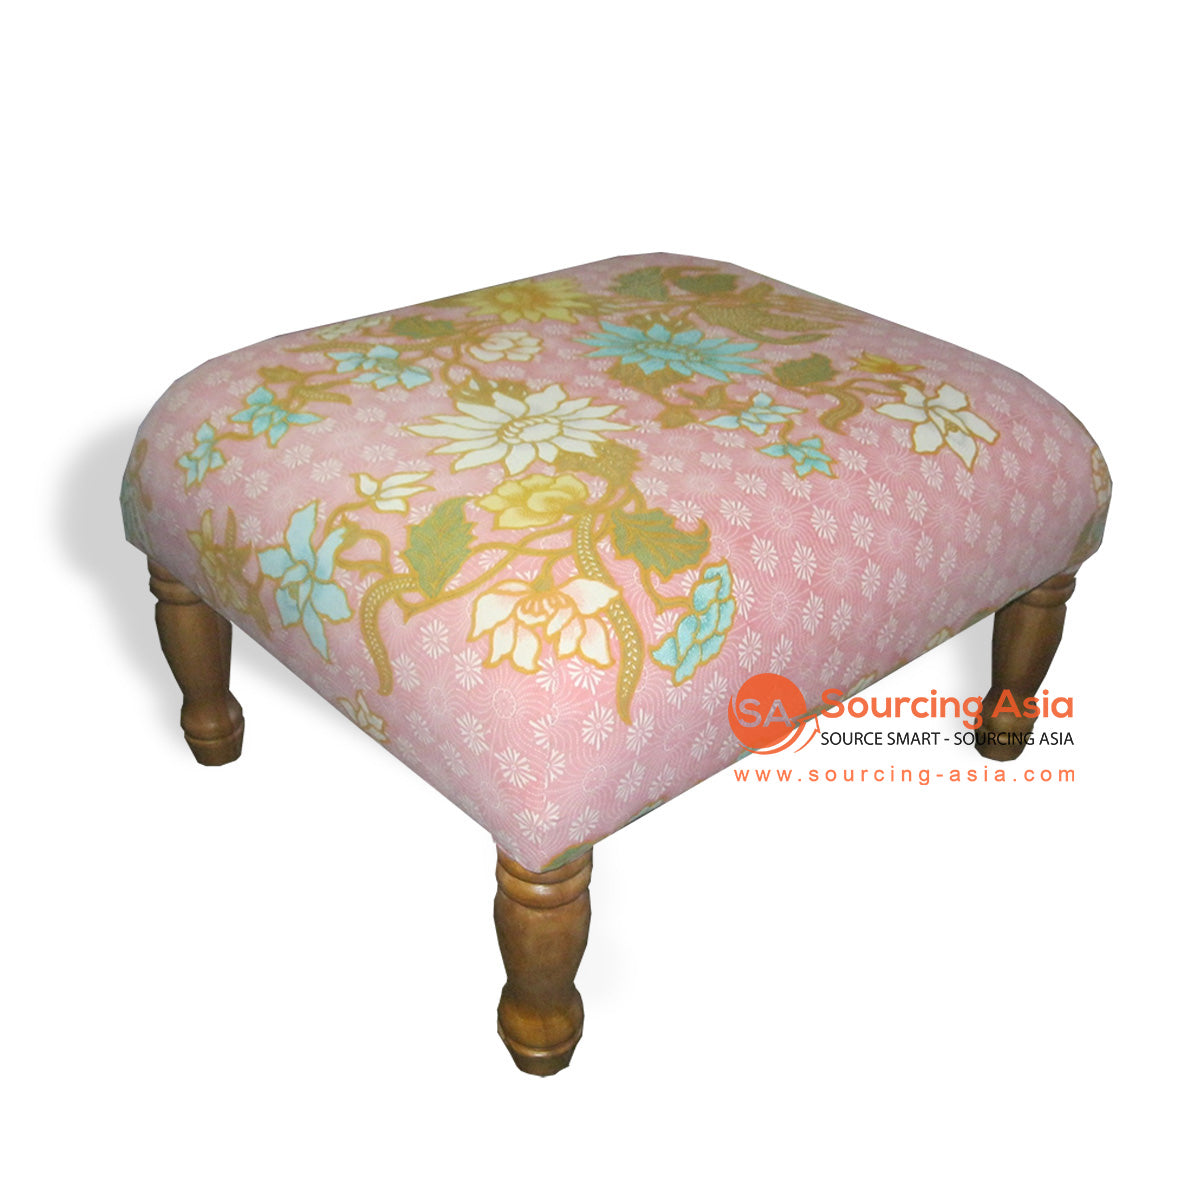 IIN003-1 NATURAL TEAK WOOD AND PINK FLORAL FABRIC UPHOLSTERED OTTOMAN WITH LEGS